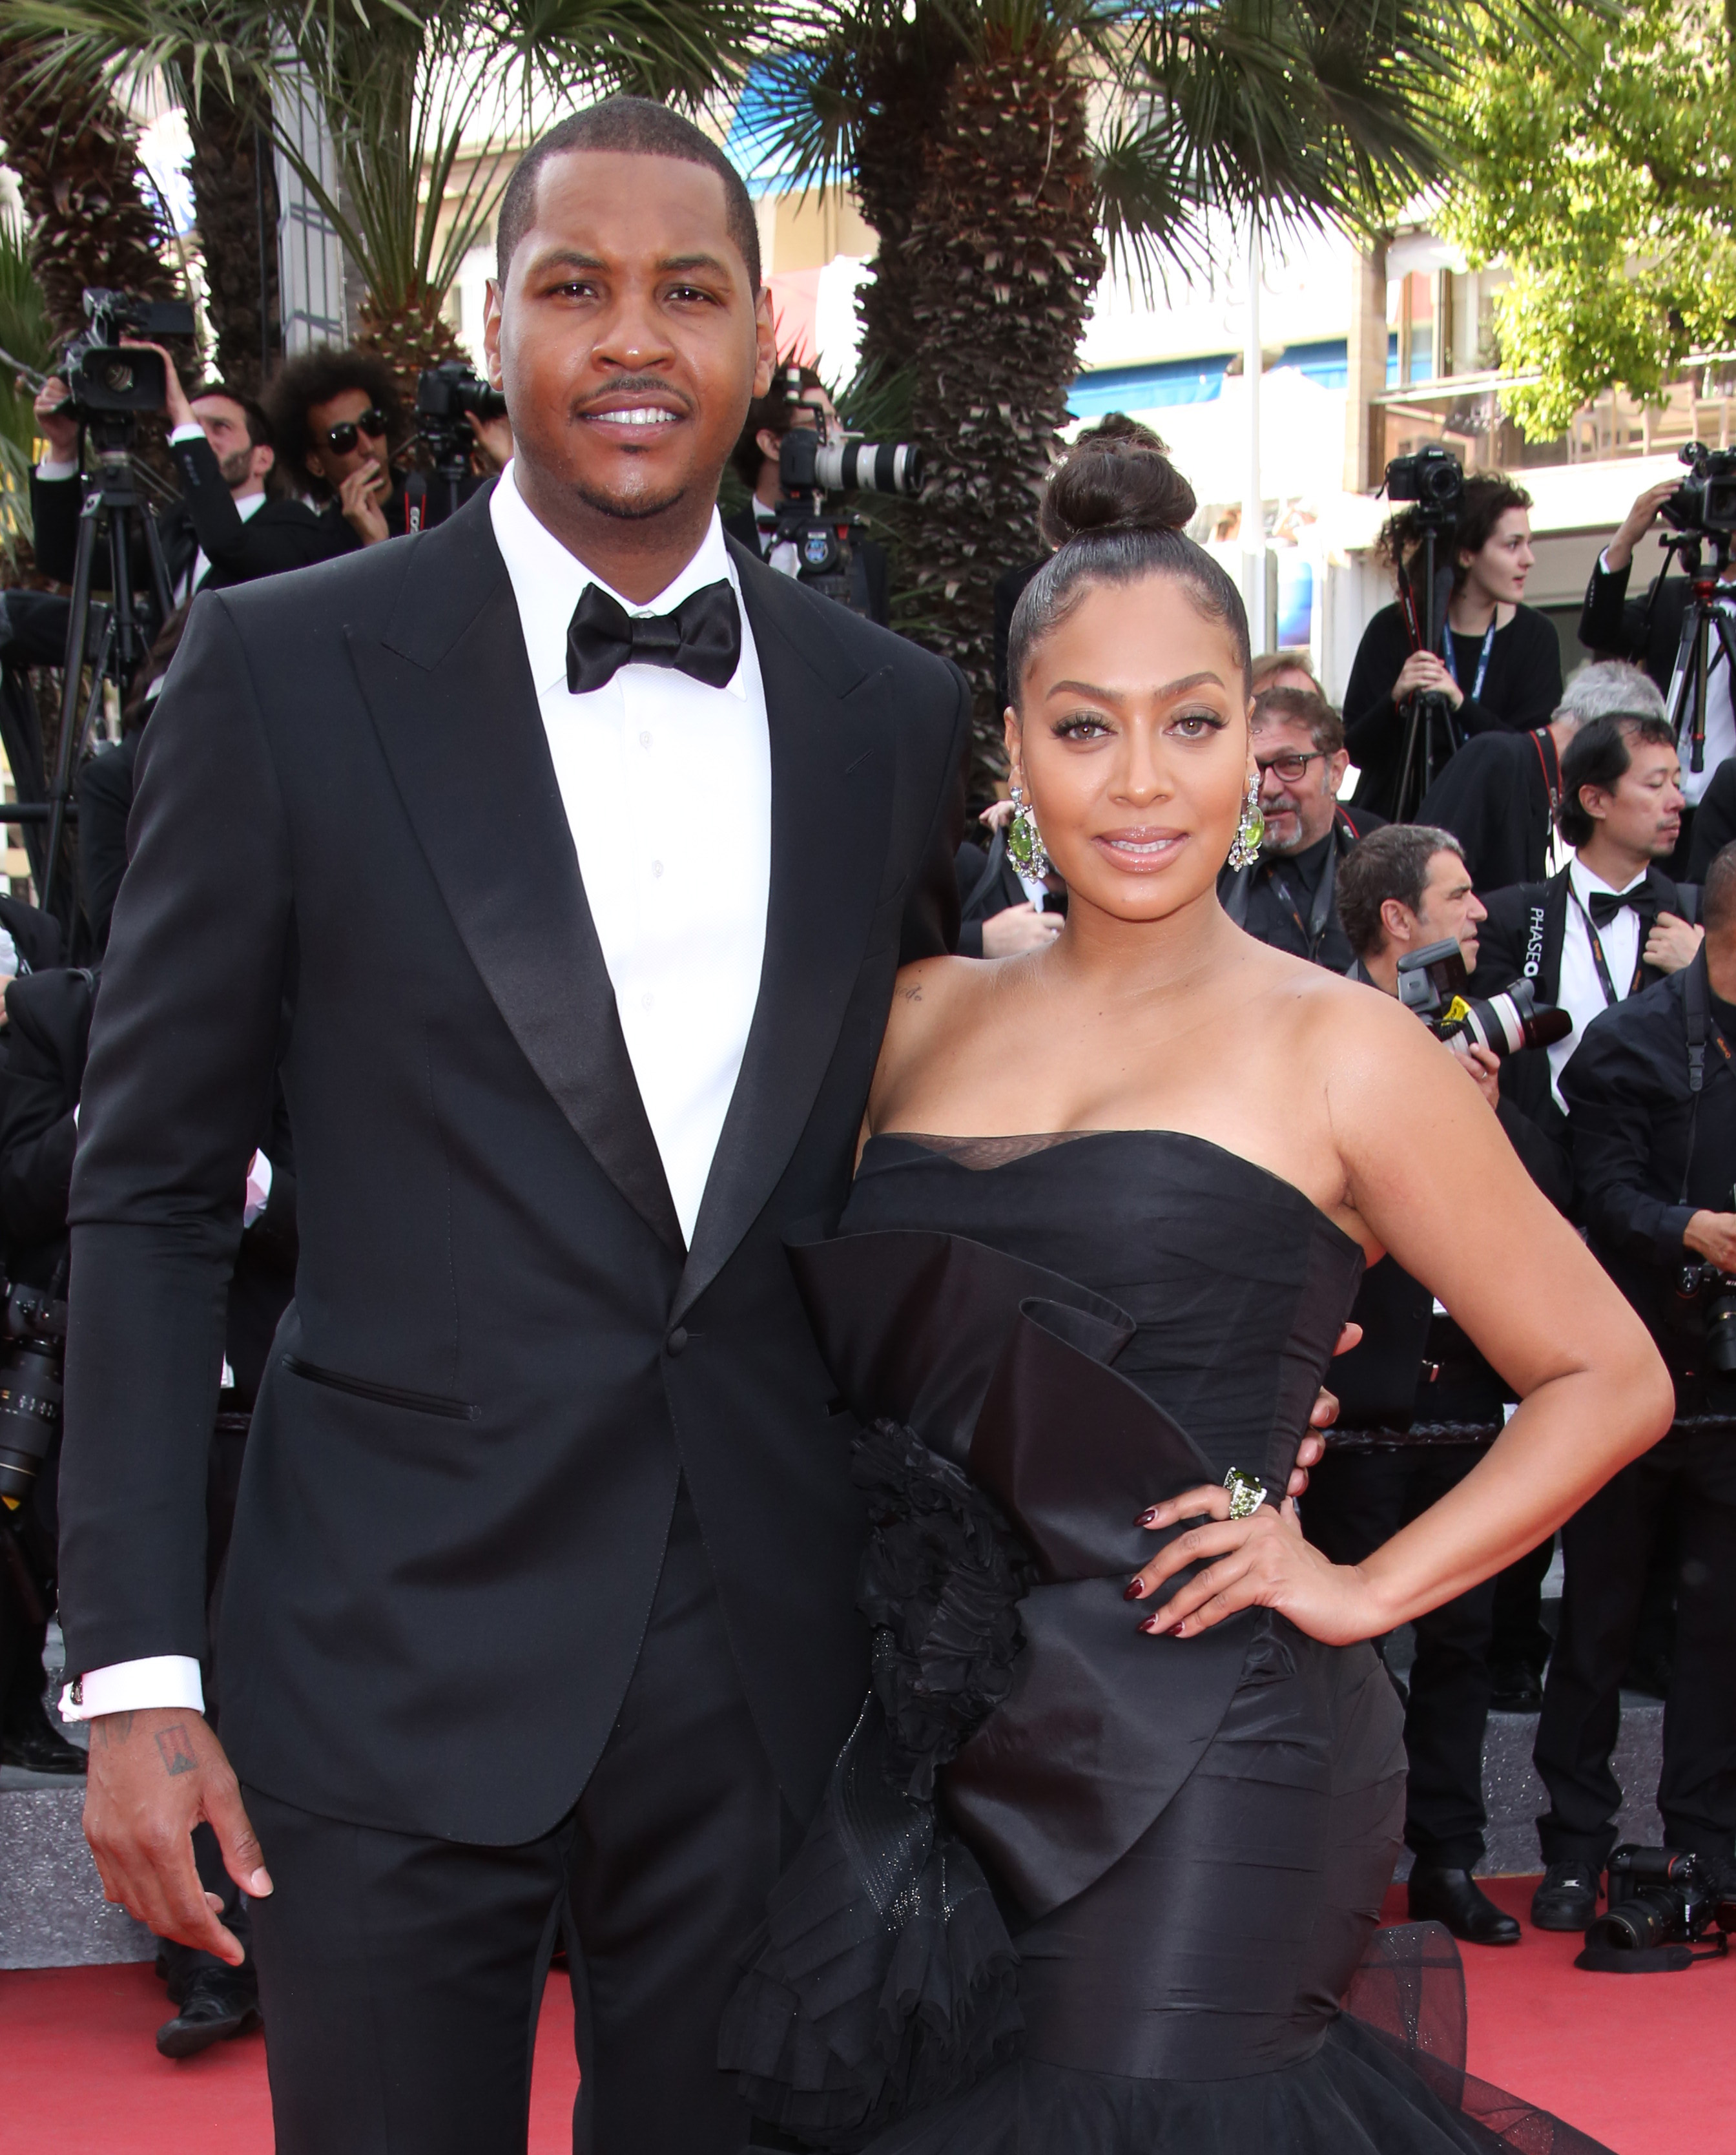 <p>In June 2019, <a href="https://www.wonderwall.com/celebrity/profiles/overview/la-la-anthony-1410.article">La La Anthony</a> and husband Carmelo Anthony, who've been off and on for years, stoked another round of <a href="https://www.wonderwall.com/celebrity/couples/camila-cabello-shawn-mendes-dating-celeb-love-life-news-late-june-2019-hollywood-romance-report-3020161.gallery?photoId=1036685">breakup rumors</a> when the actress celebrated her birthday with friends in New York City as the basketball star spent time with swimsuit-clad Swedish-Moroccan model Sara Smiri on a yacht off the coast of France. At the time, Melo denied that he and the beauty -- whom he described as a married friend -- were having an affair. (There were conflicting reports about whether or not she's actually married.) La La, meanwhile, publicly shrugged off her husband's absence from her birthday festivities, though <a href="https://pagesix.com/2019/06/27/la-la-anthony-a-wreck-after-carmelo-caught-yachting-with-mystery-gal/">Page Six</a> reported that she was secretly "a wreck" over her husband's perceived infidelity. As of mid-2020, the duo were still together, though the "Power" star's rep said a year earlier that she was "<a href="https://www.wonderwall.com/celebrity/couples/biggest-celebrity-love-life-stories-late-june-and-early-july-2019-hollywood-romance-report-3020311.gallery?photoId=1036685">proceeding with legal discussions as the next step</a>" in their marriage.</p>